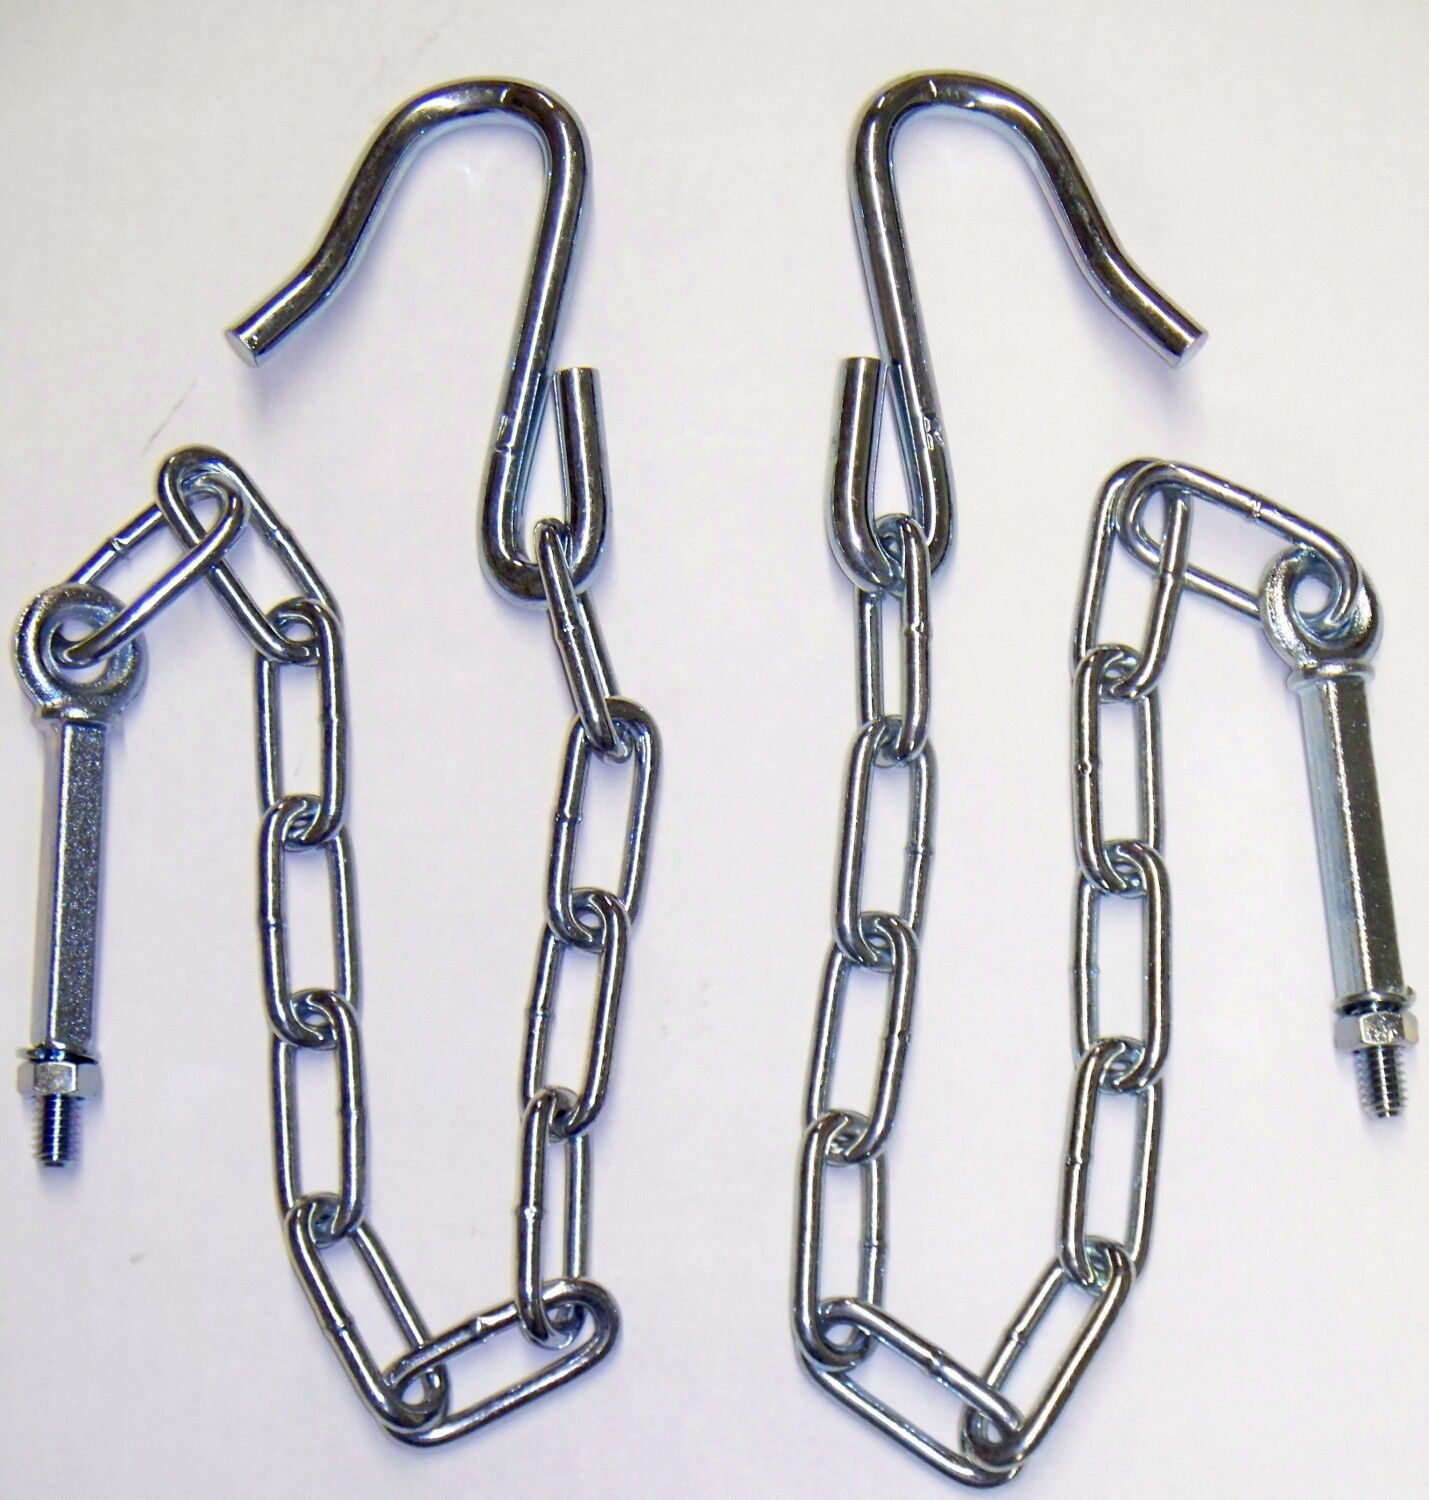 1947 48 49 50 51 52 53 Chevy GMC truck tailgate chains